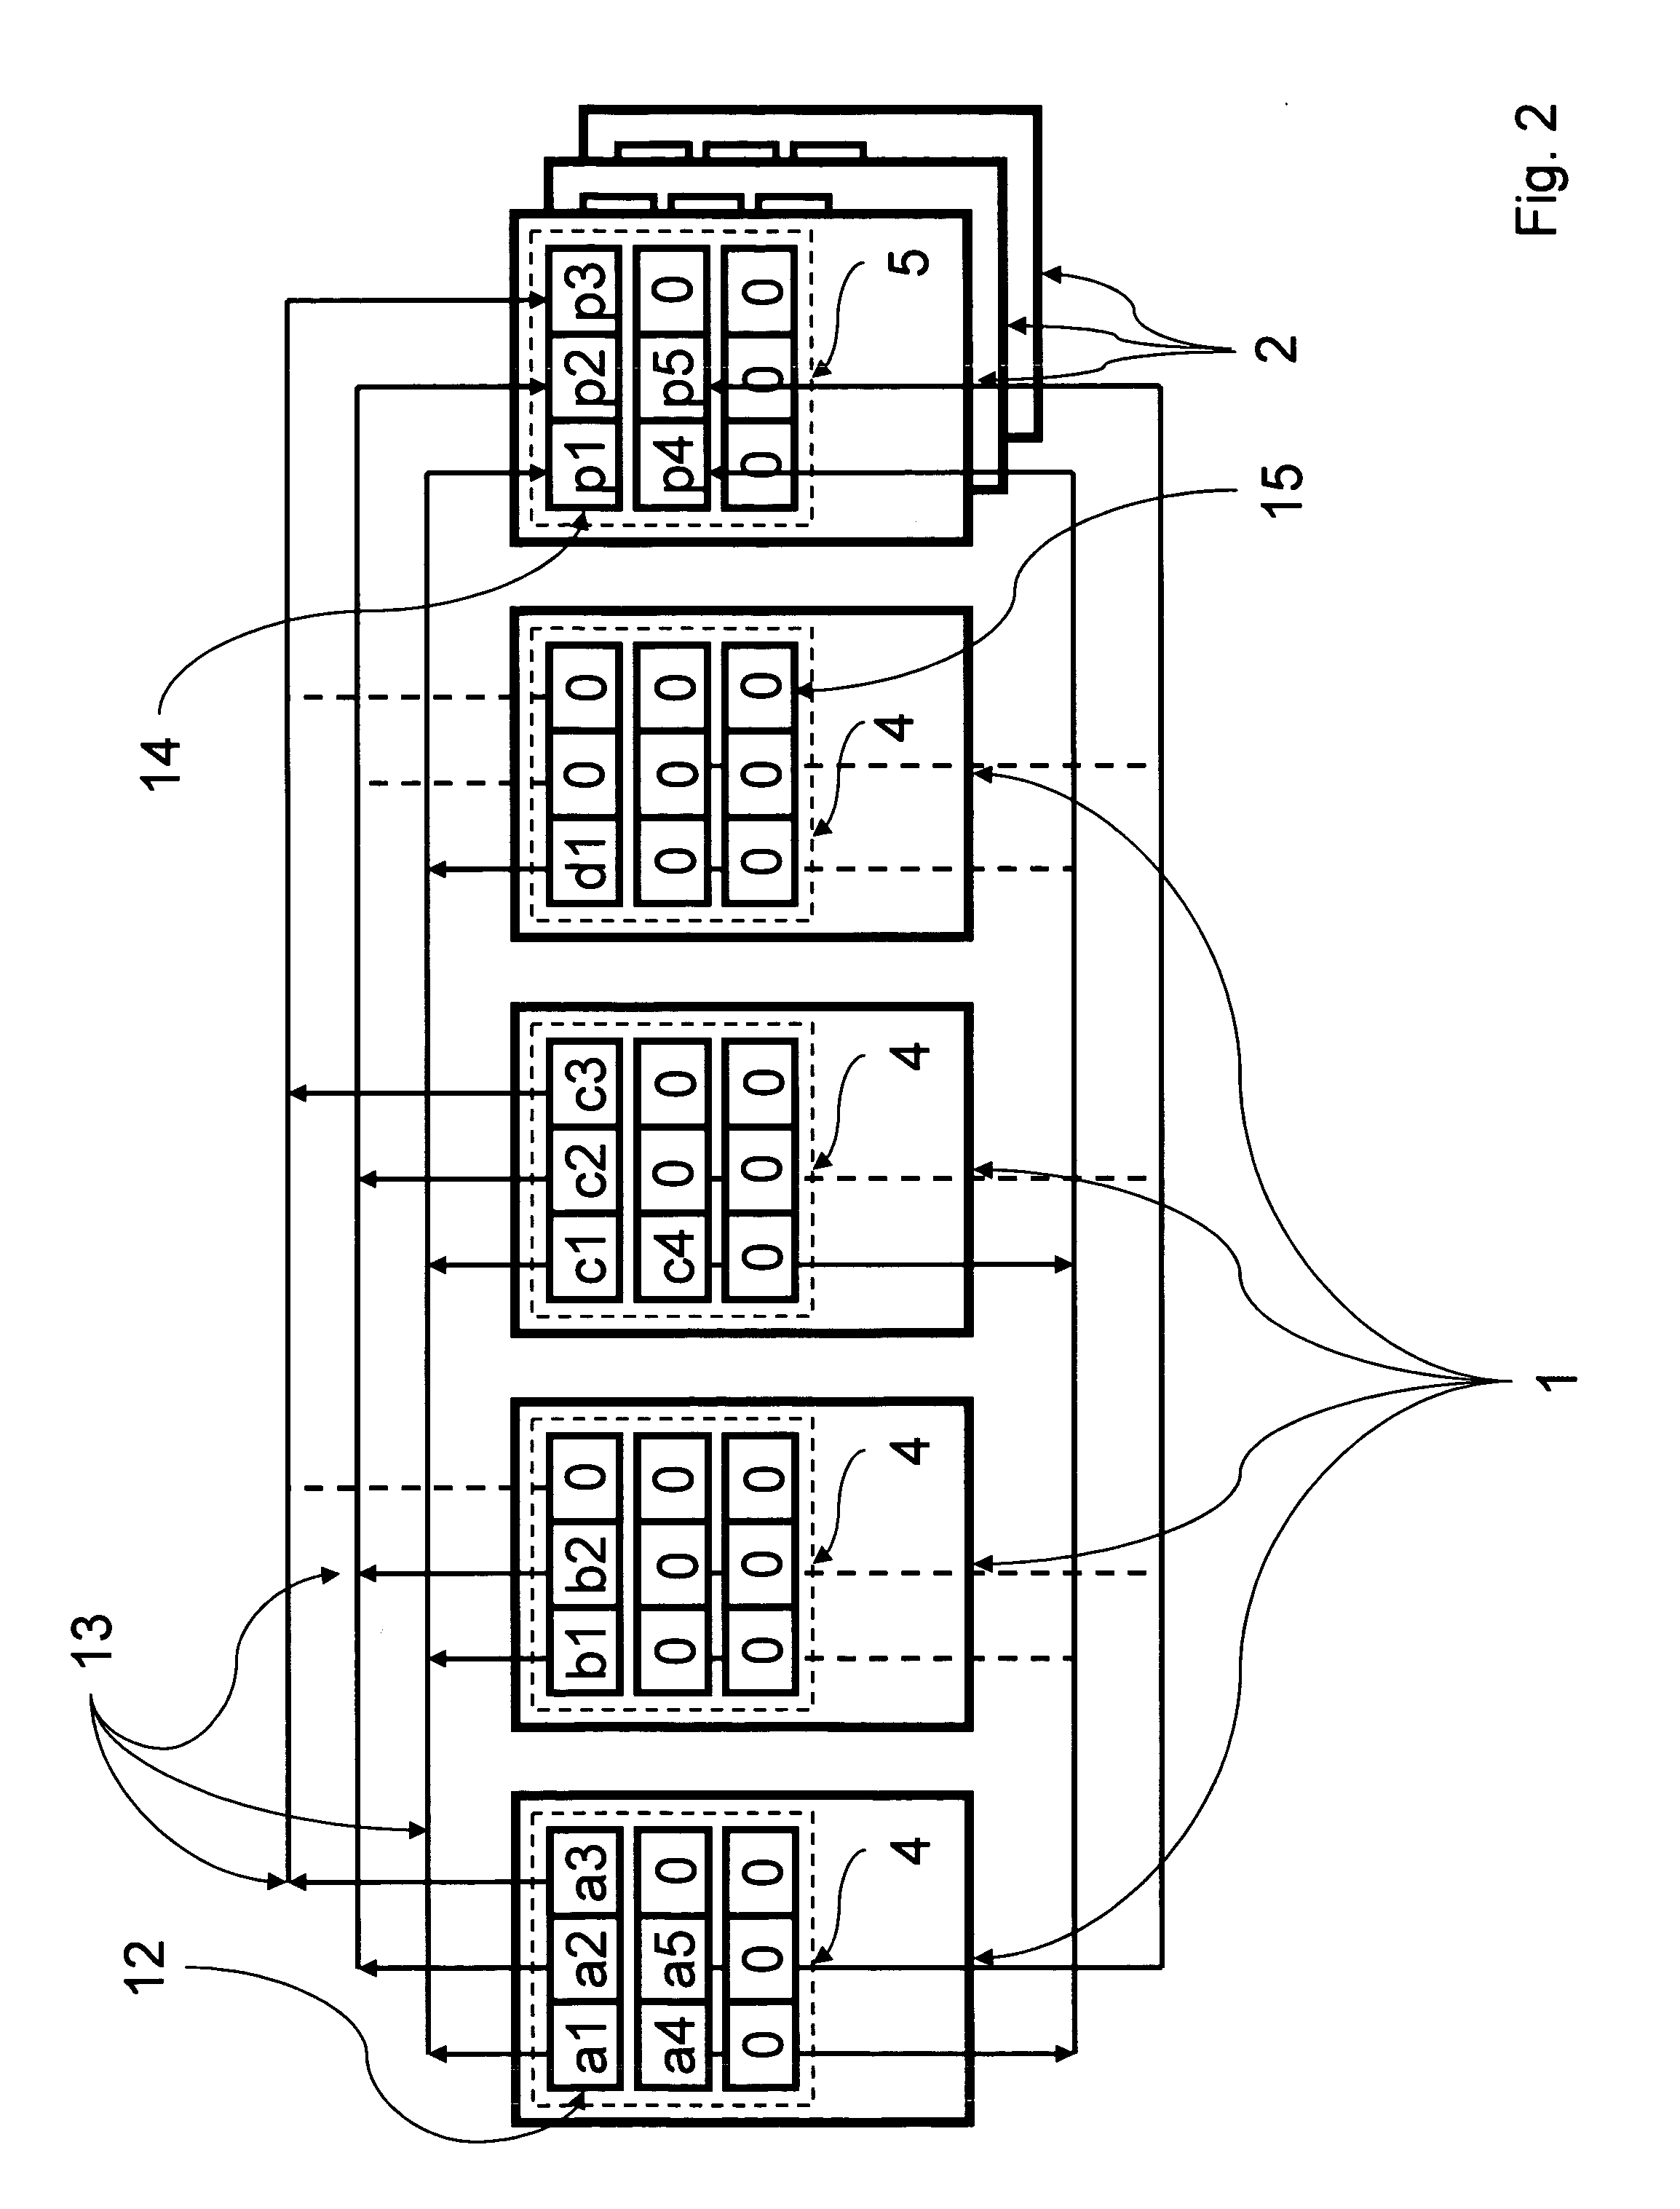 Method and apparatus for enabling high-reliability storage of distributed data on a plurality of independent storage devices